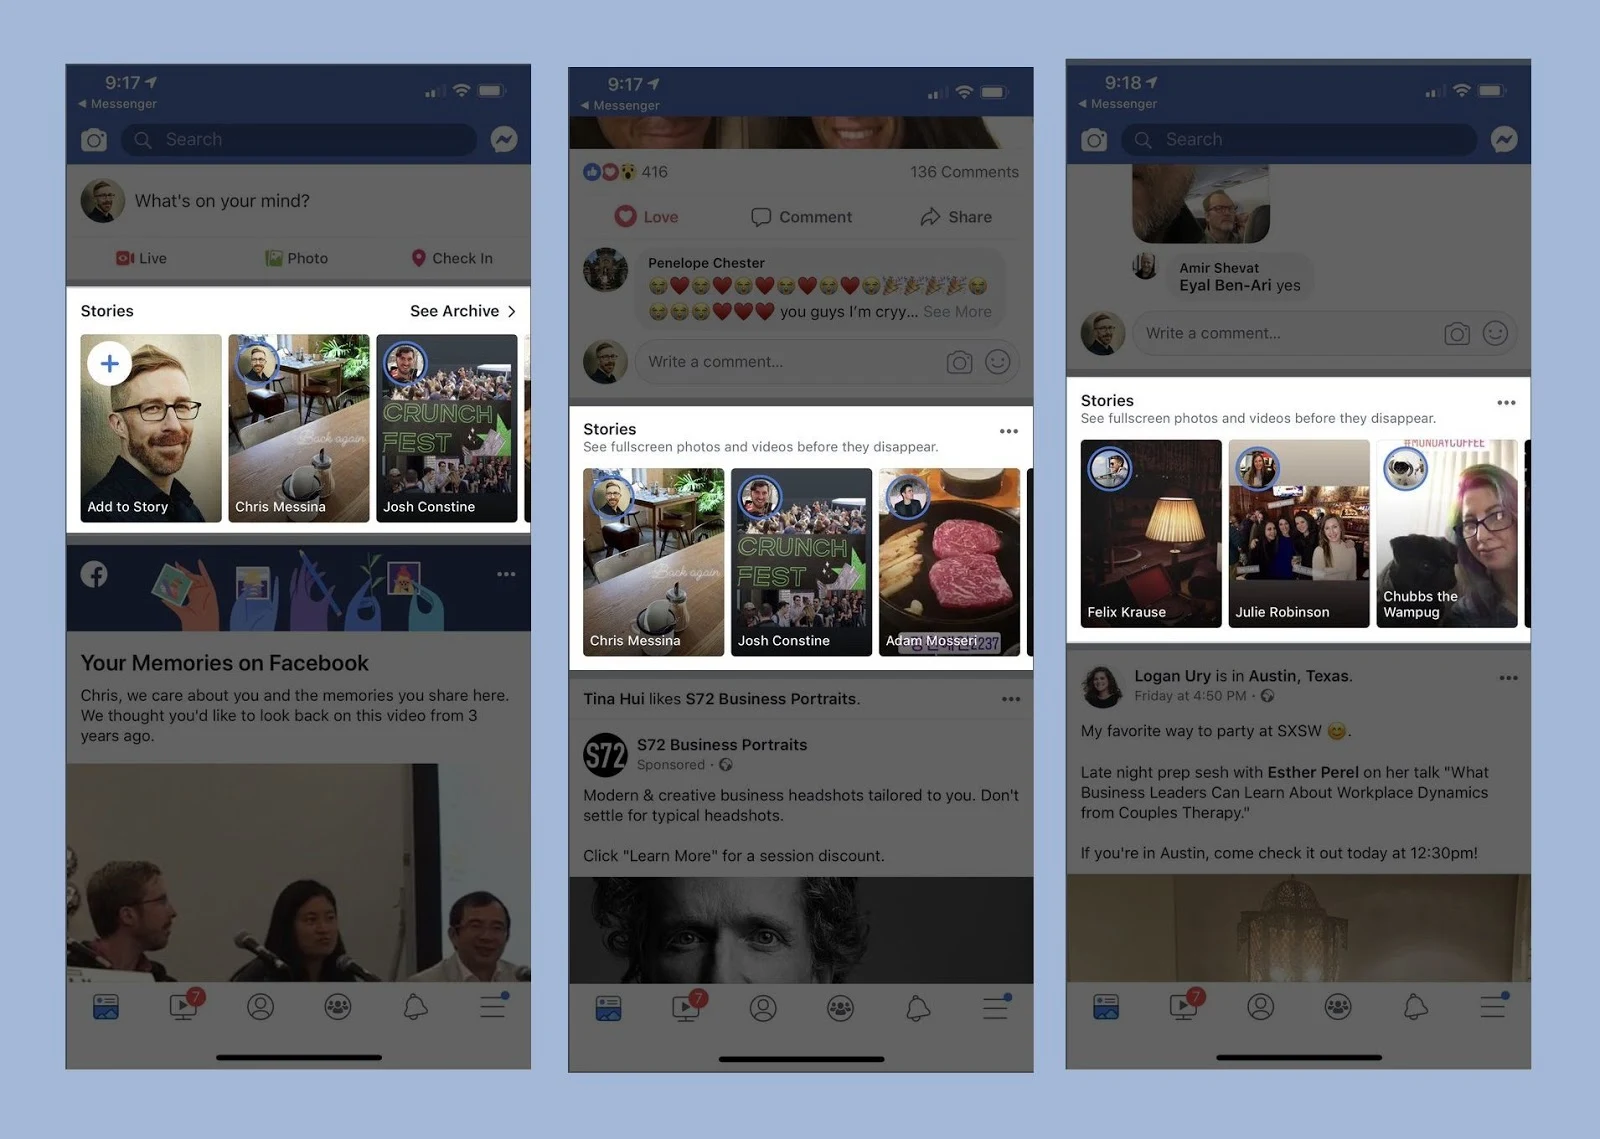 Facebook is trying hard to push Stories in users feed